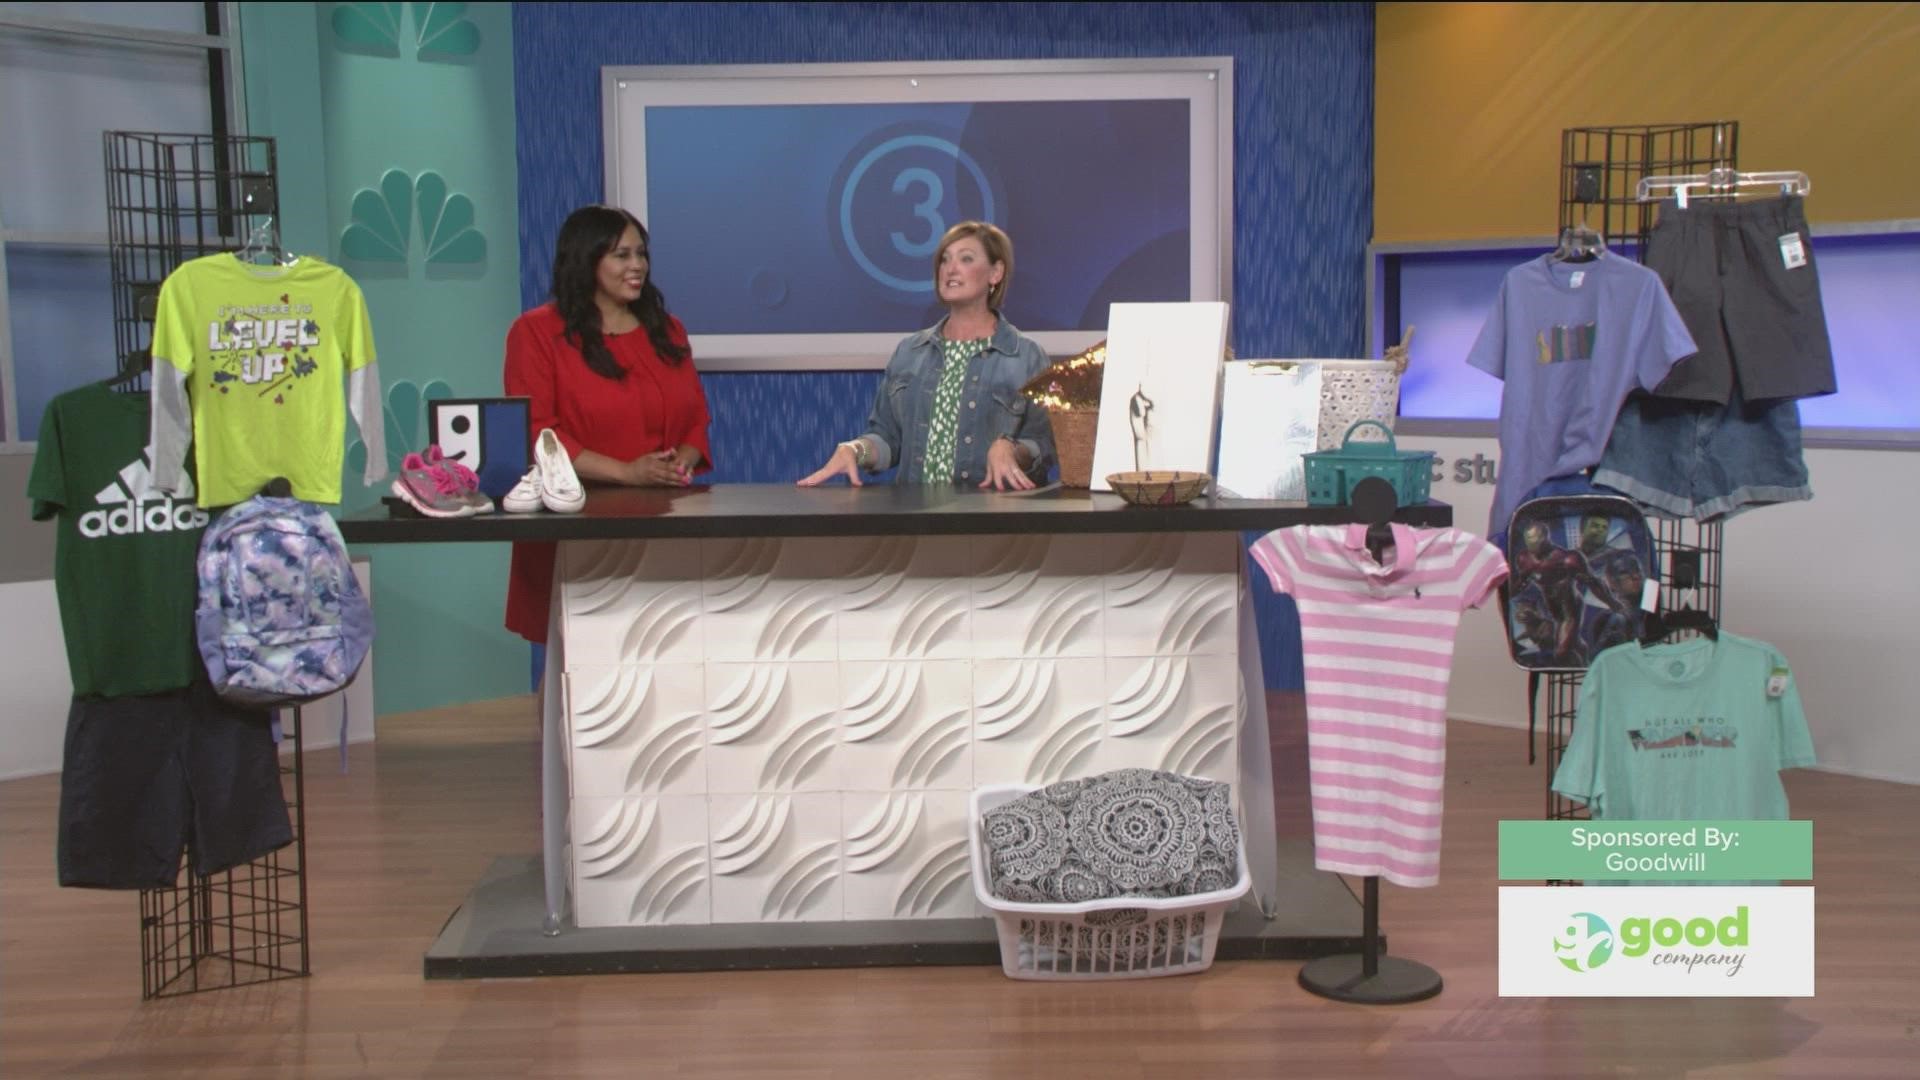 Maureen Ater, Vice President of Marketing & Development for Goodwill, shows Ciarra some items you can find there, just in time for the back to school season.